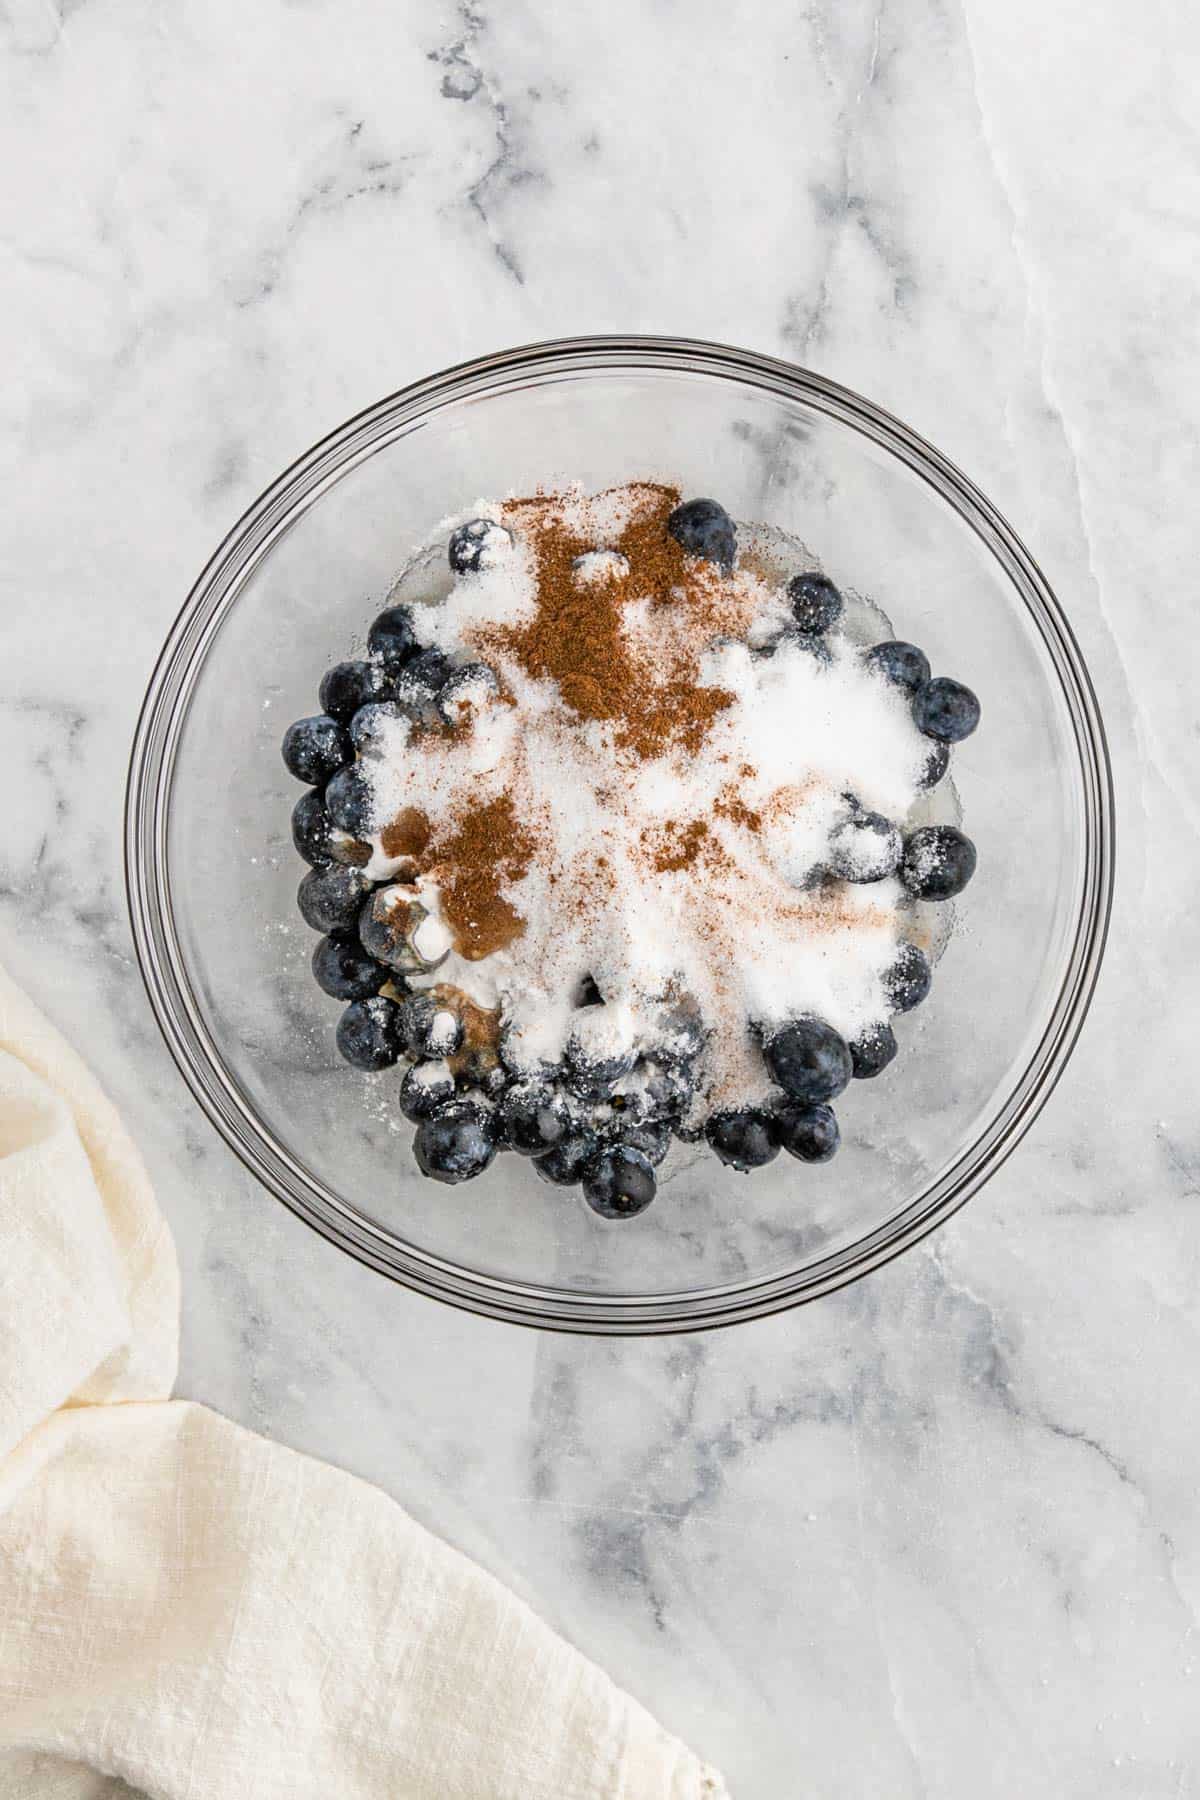 Blueberries in a bowl topped with sugar and spices.